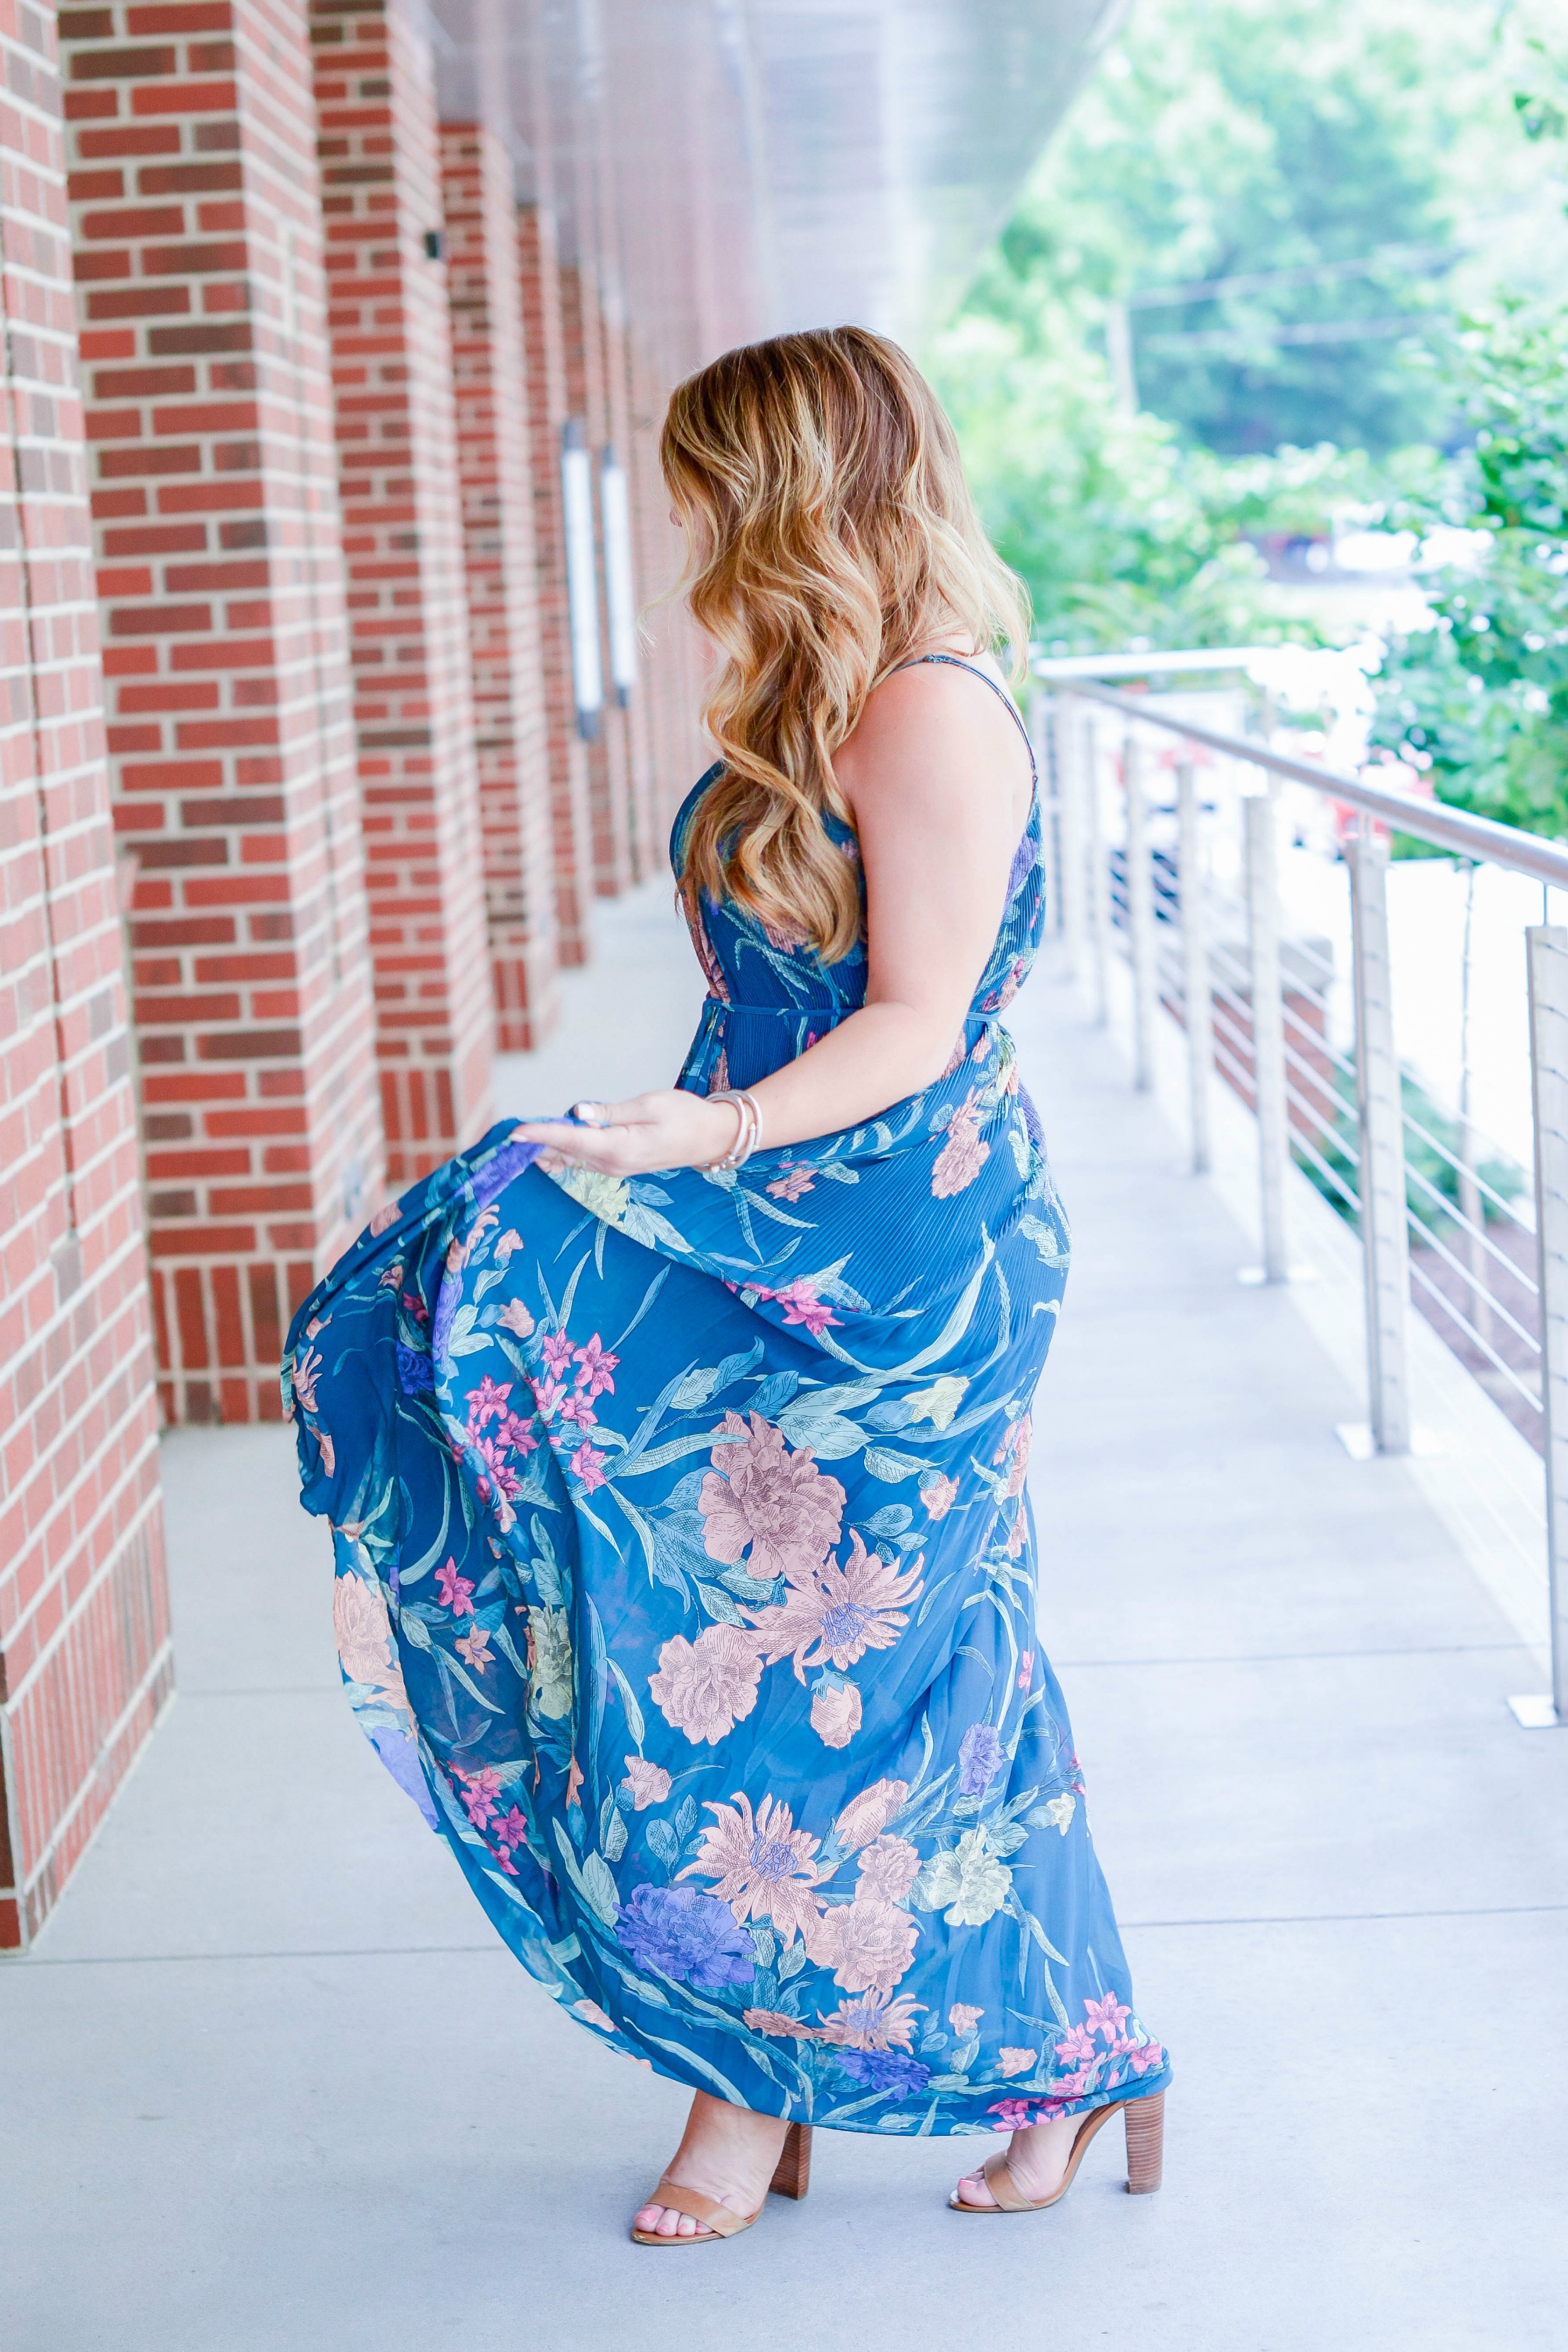 How to Wear a Maxi Dress | Short Girls' Guide | Coffee Beans and Bobby Pins